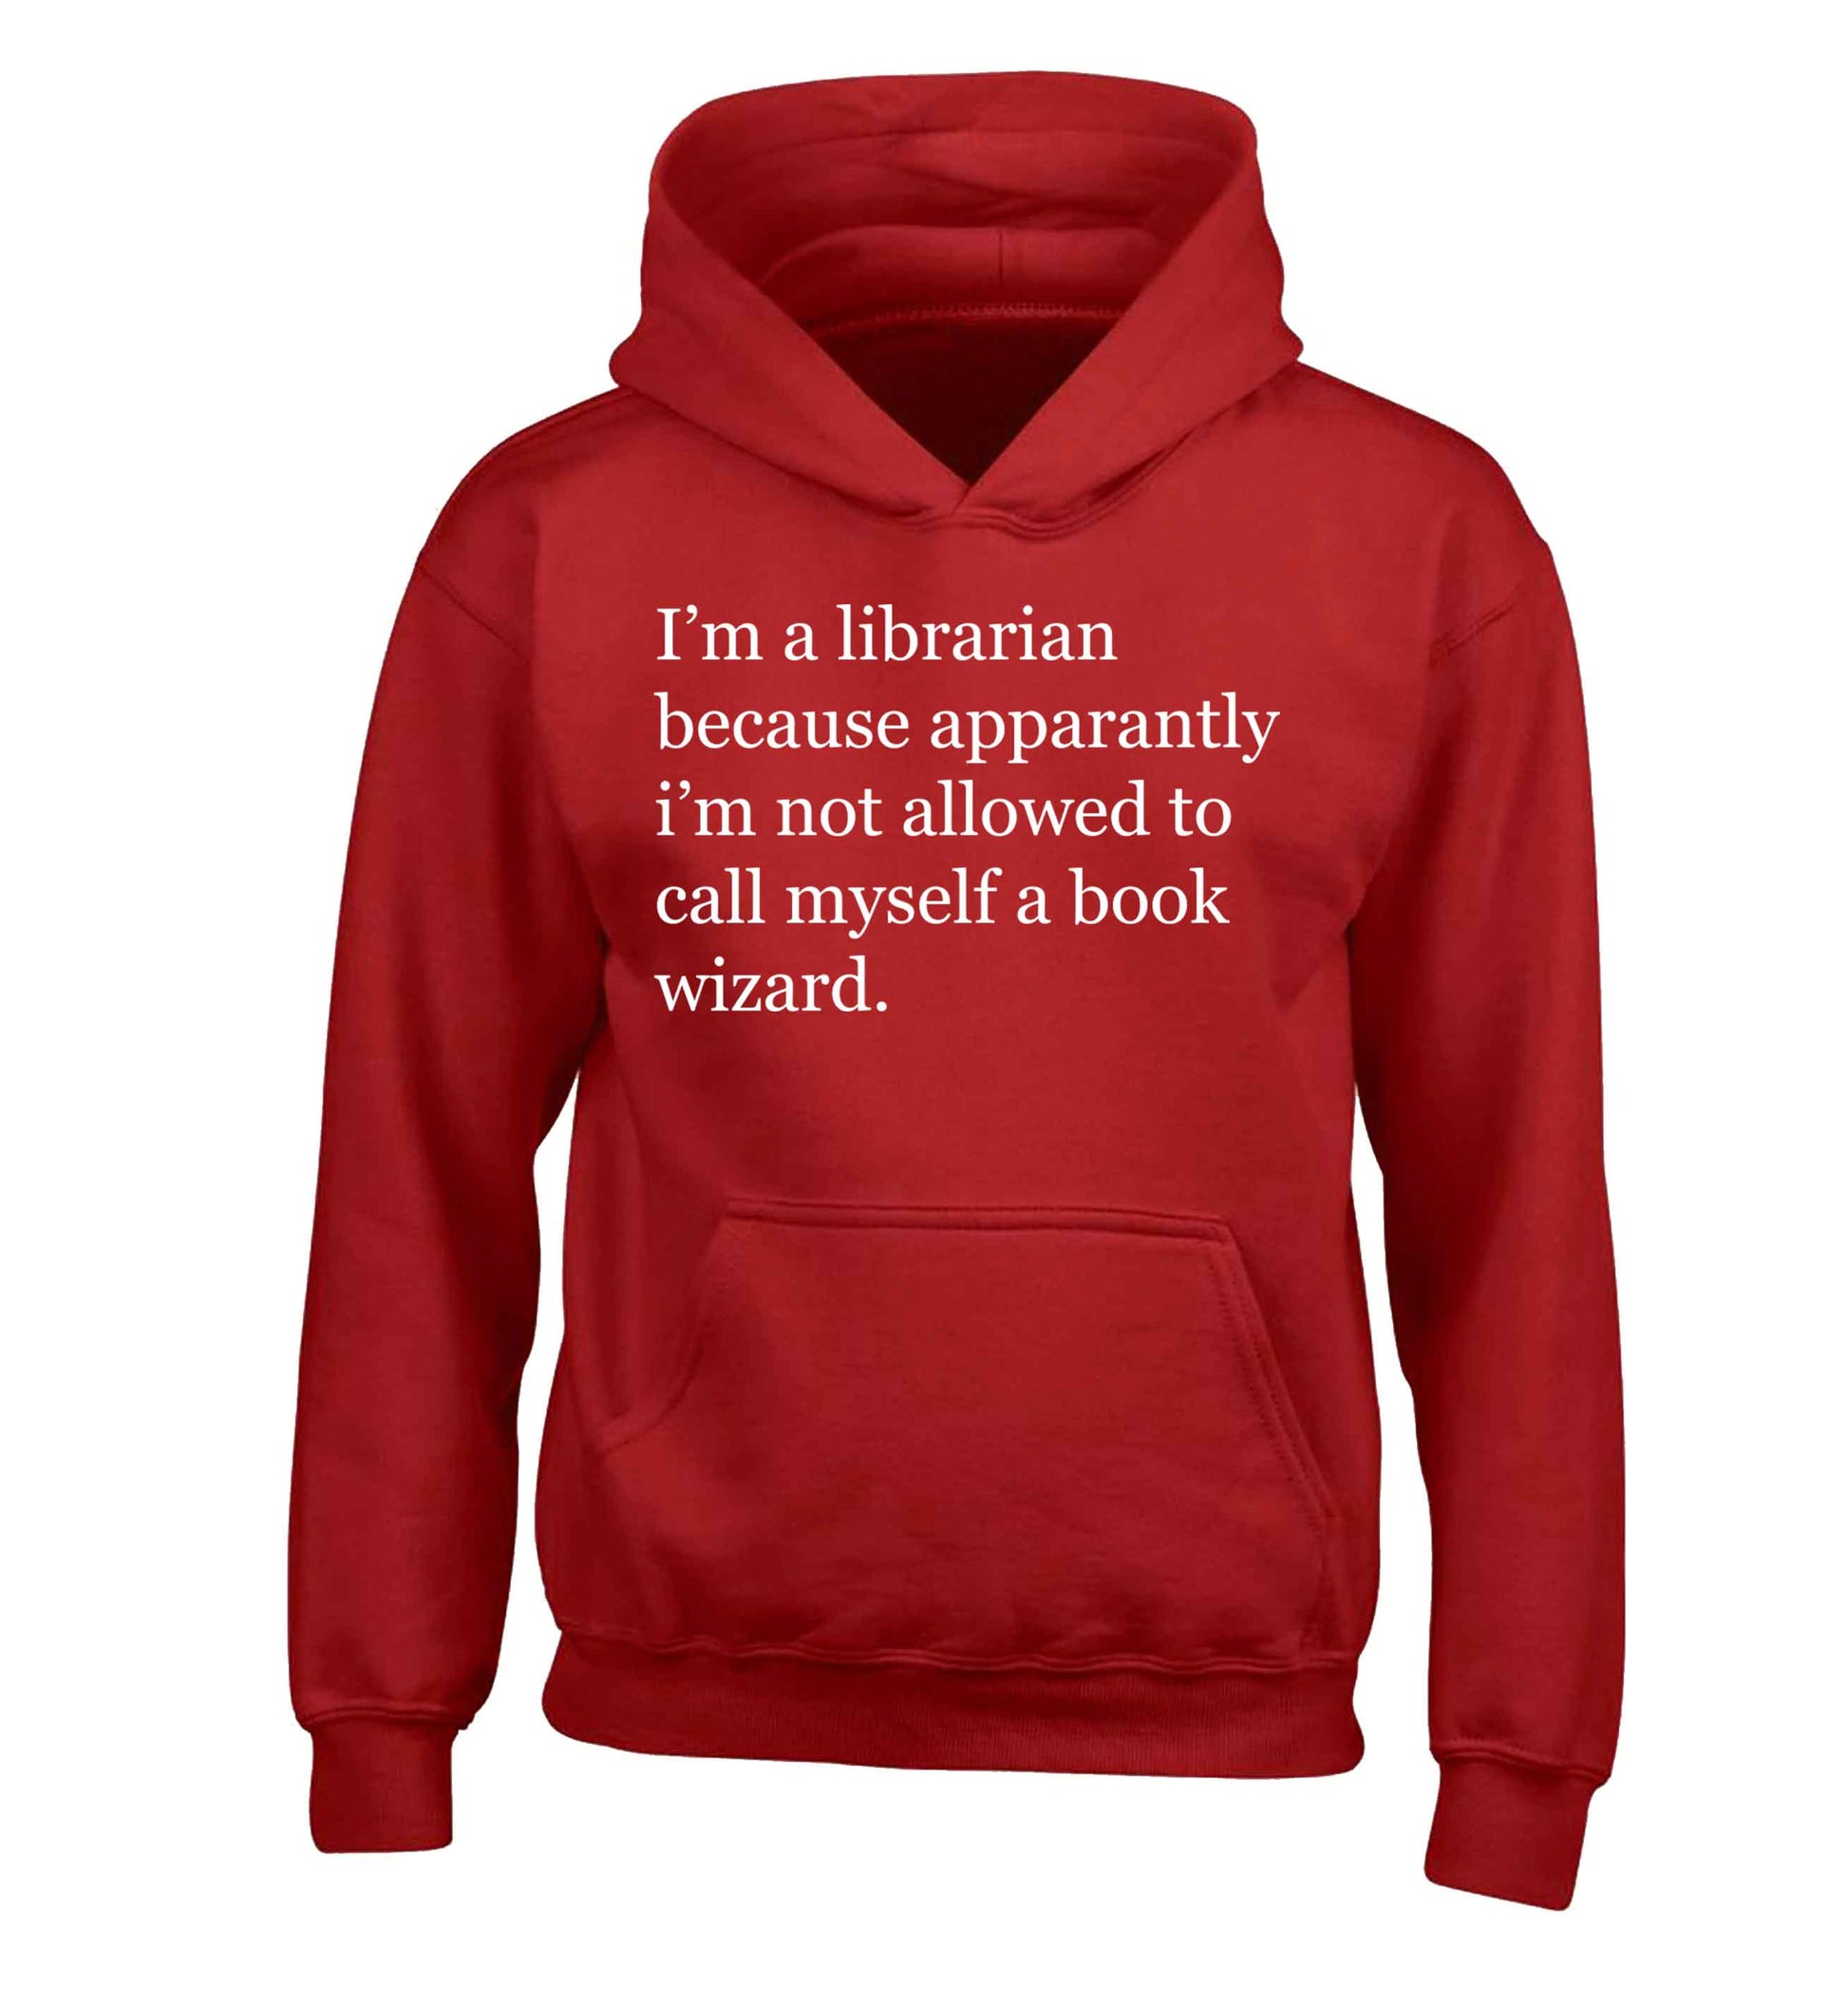 i√ïm a librarian because apparantly i√ïm not allowed to call myself a book wizard children's red hoodie 12-13 Years